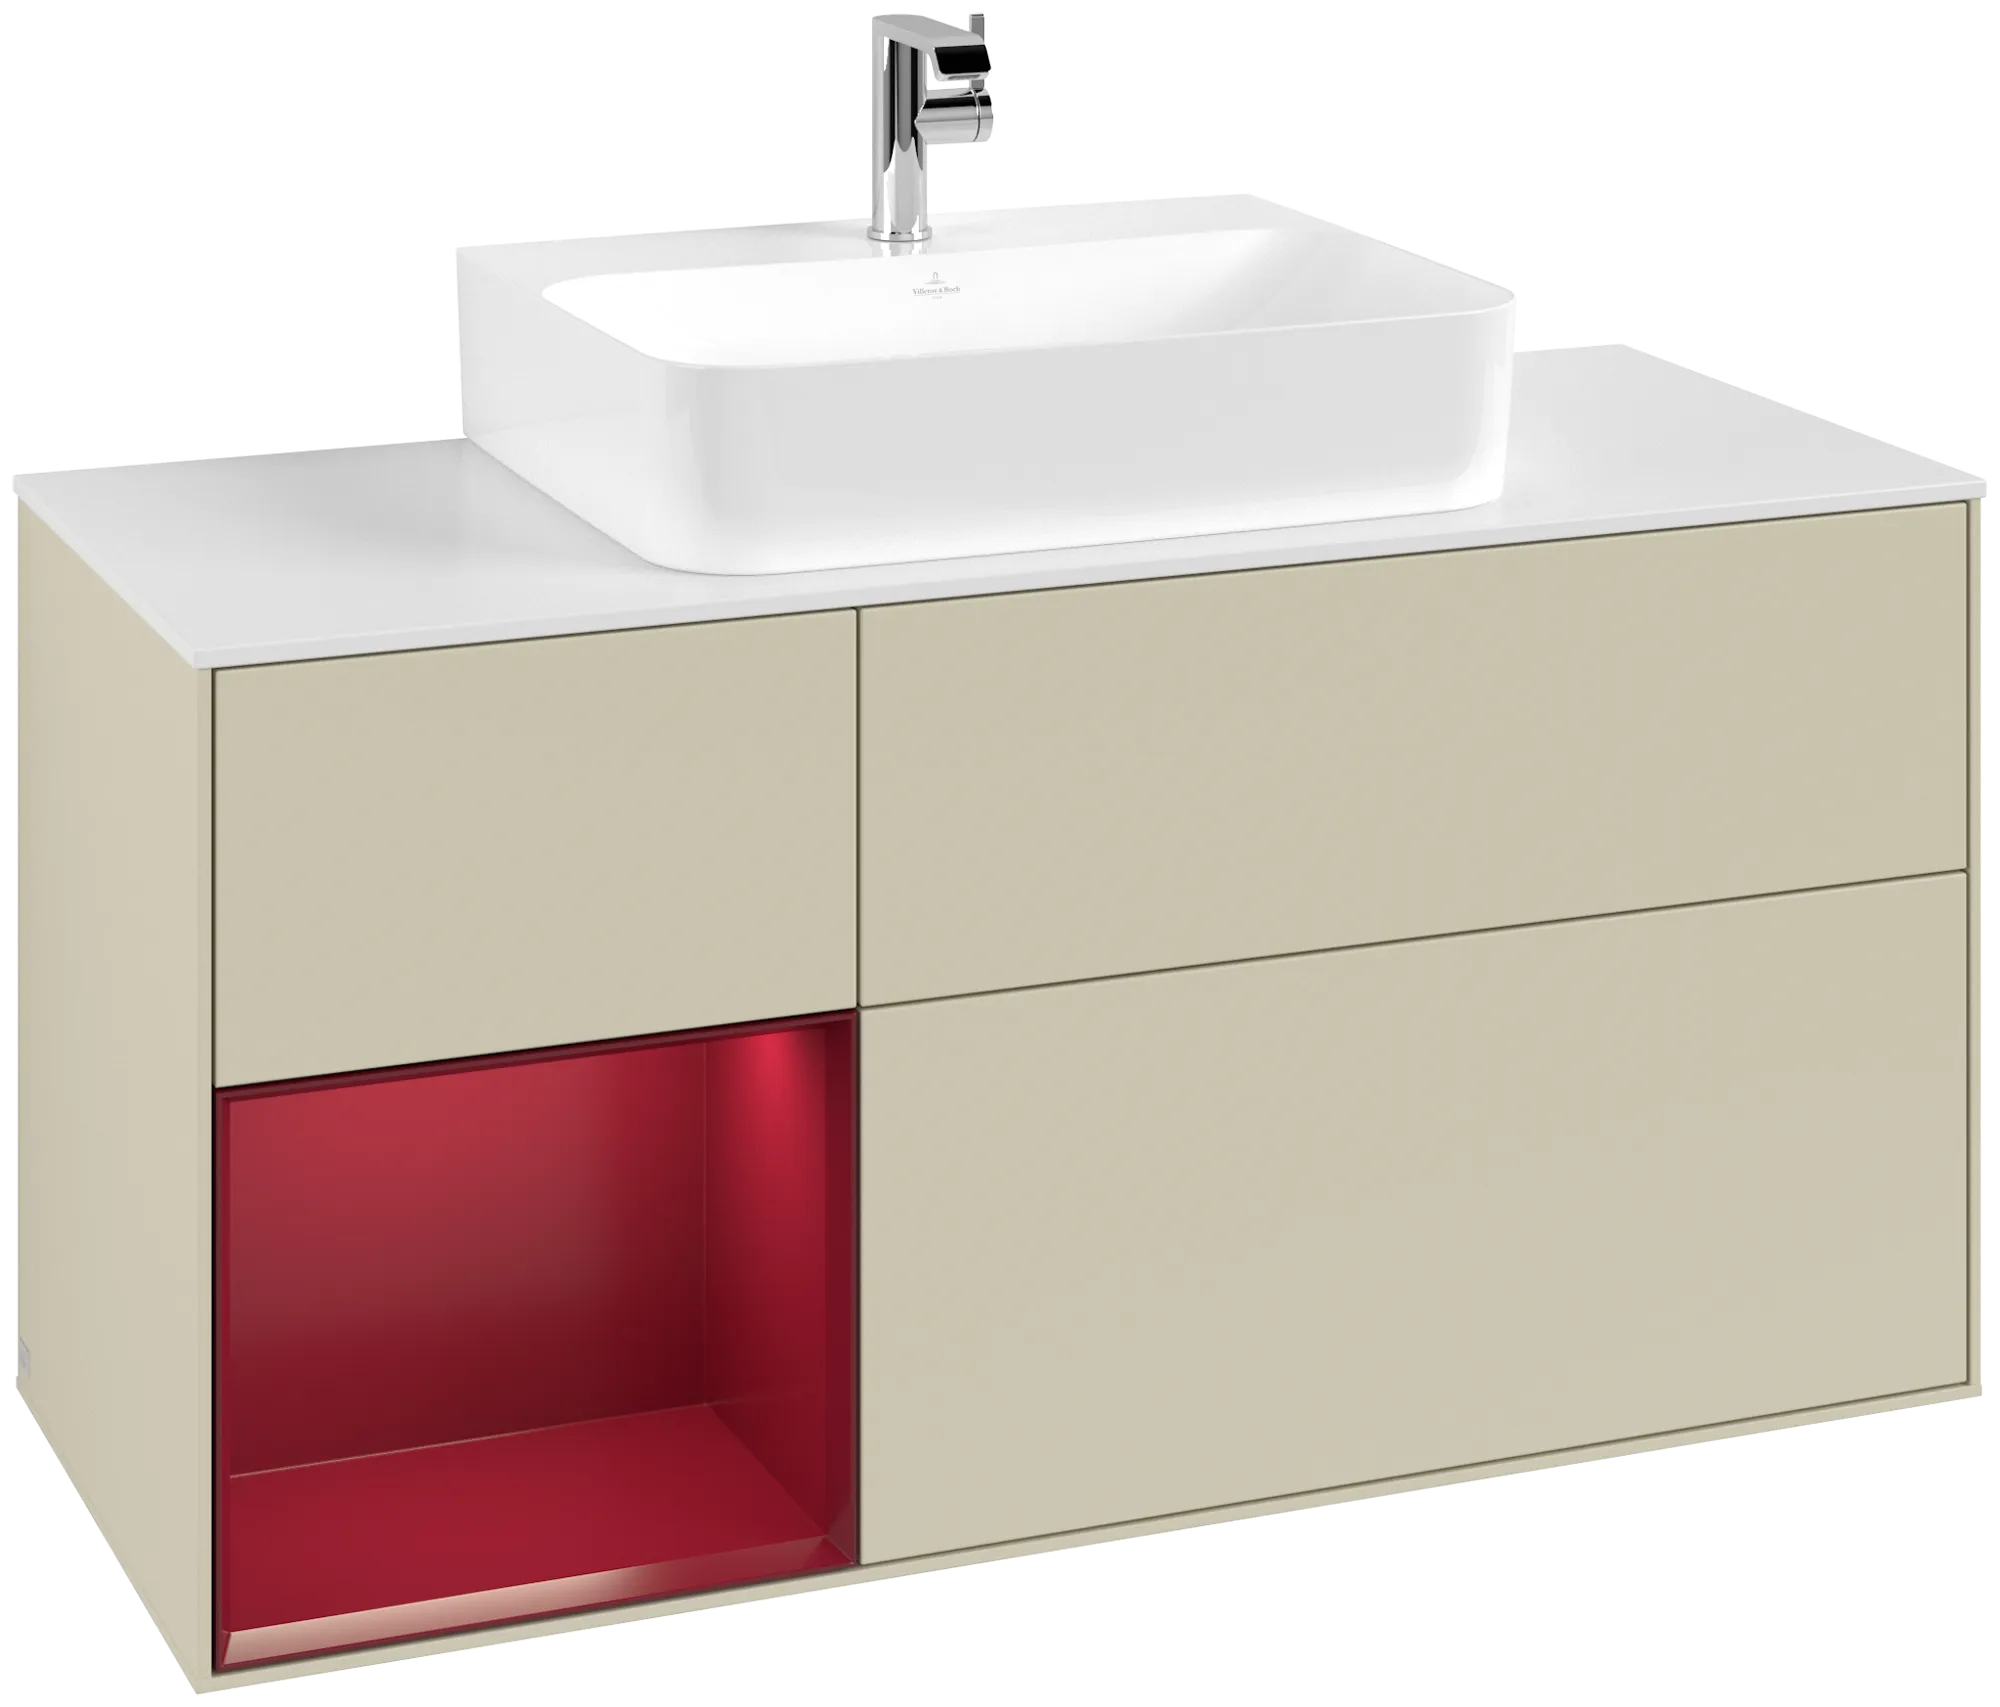 Picture of VILLEROY BOCH Finion Vanity unit, with lighting, 3 pull-out compartments, 1200 x 603 x 501 mm, Silk Grey Matt Lacquer / Peony Matt Lacquer / Glass White Matt #G161HBHJ